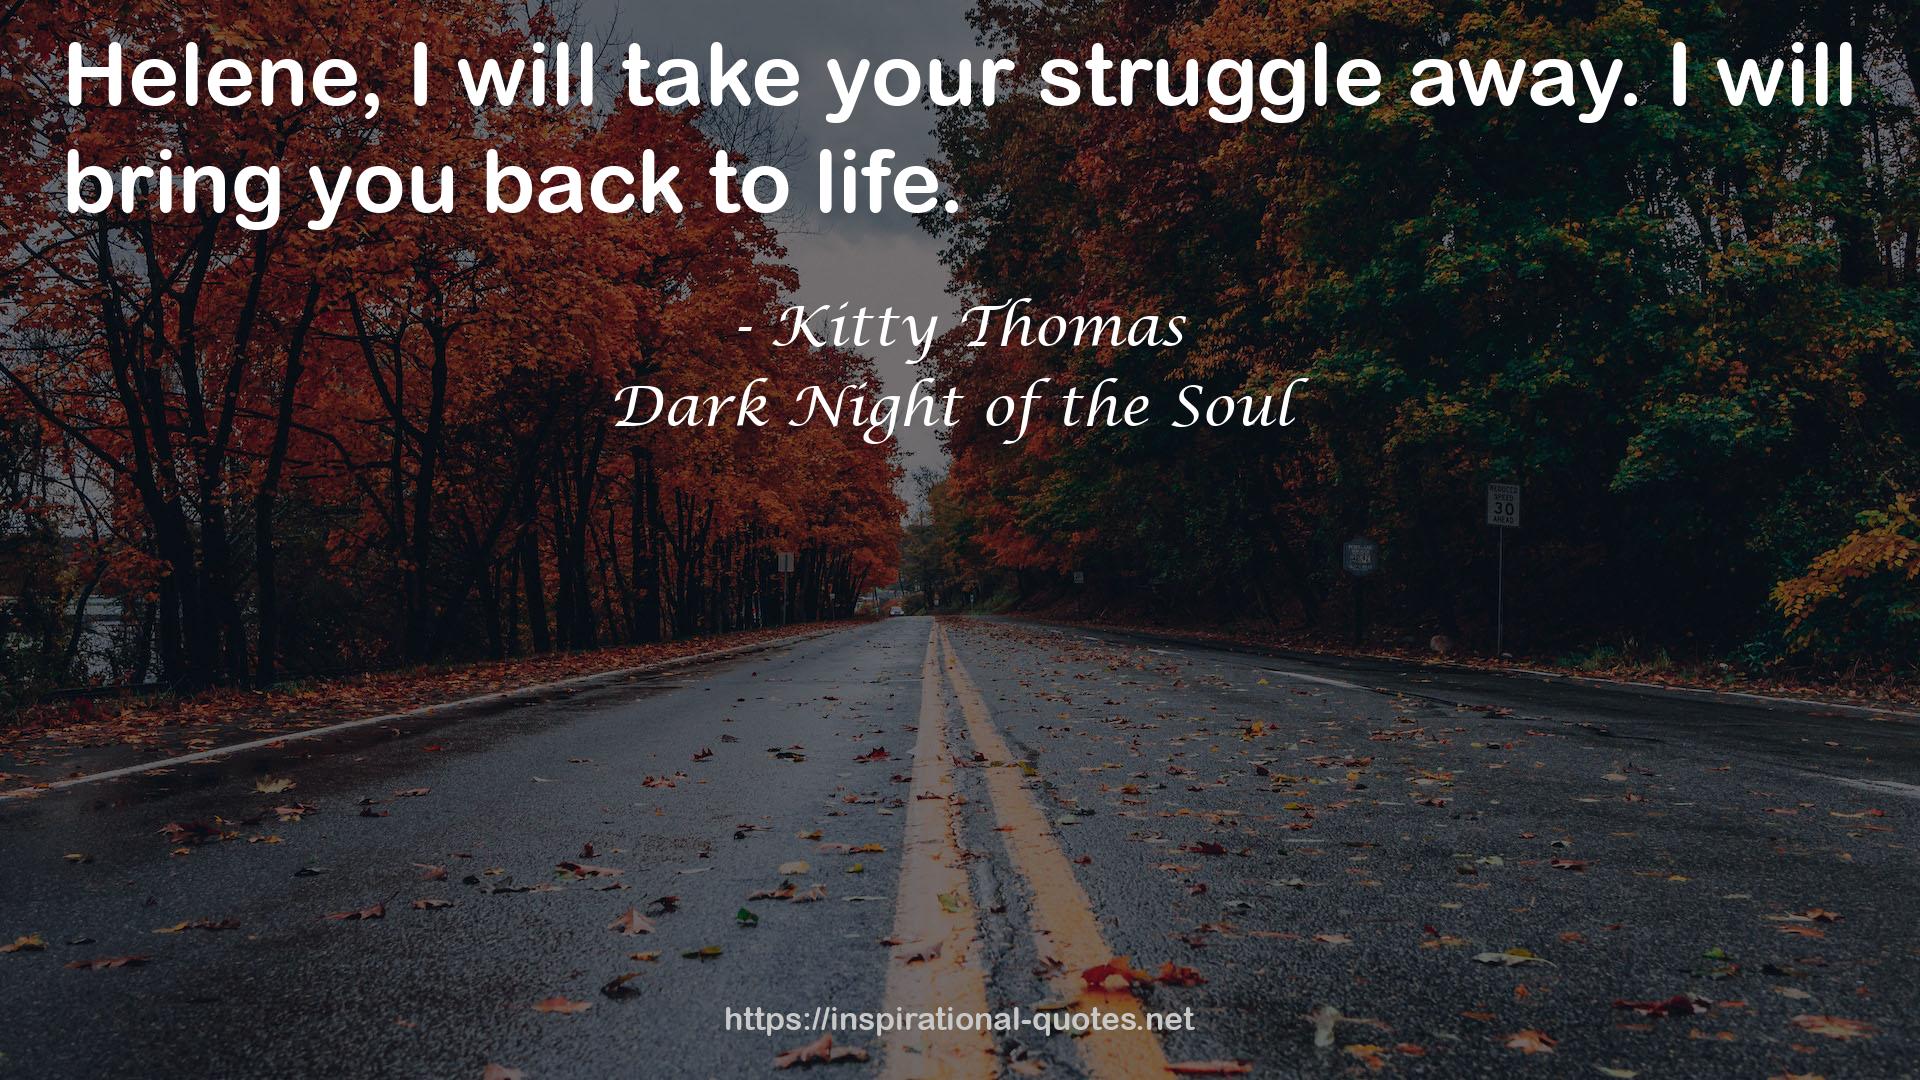 Dark Night of the Soul QUOTES